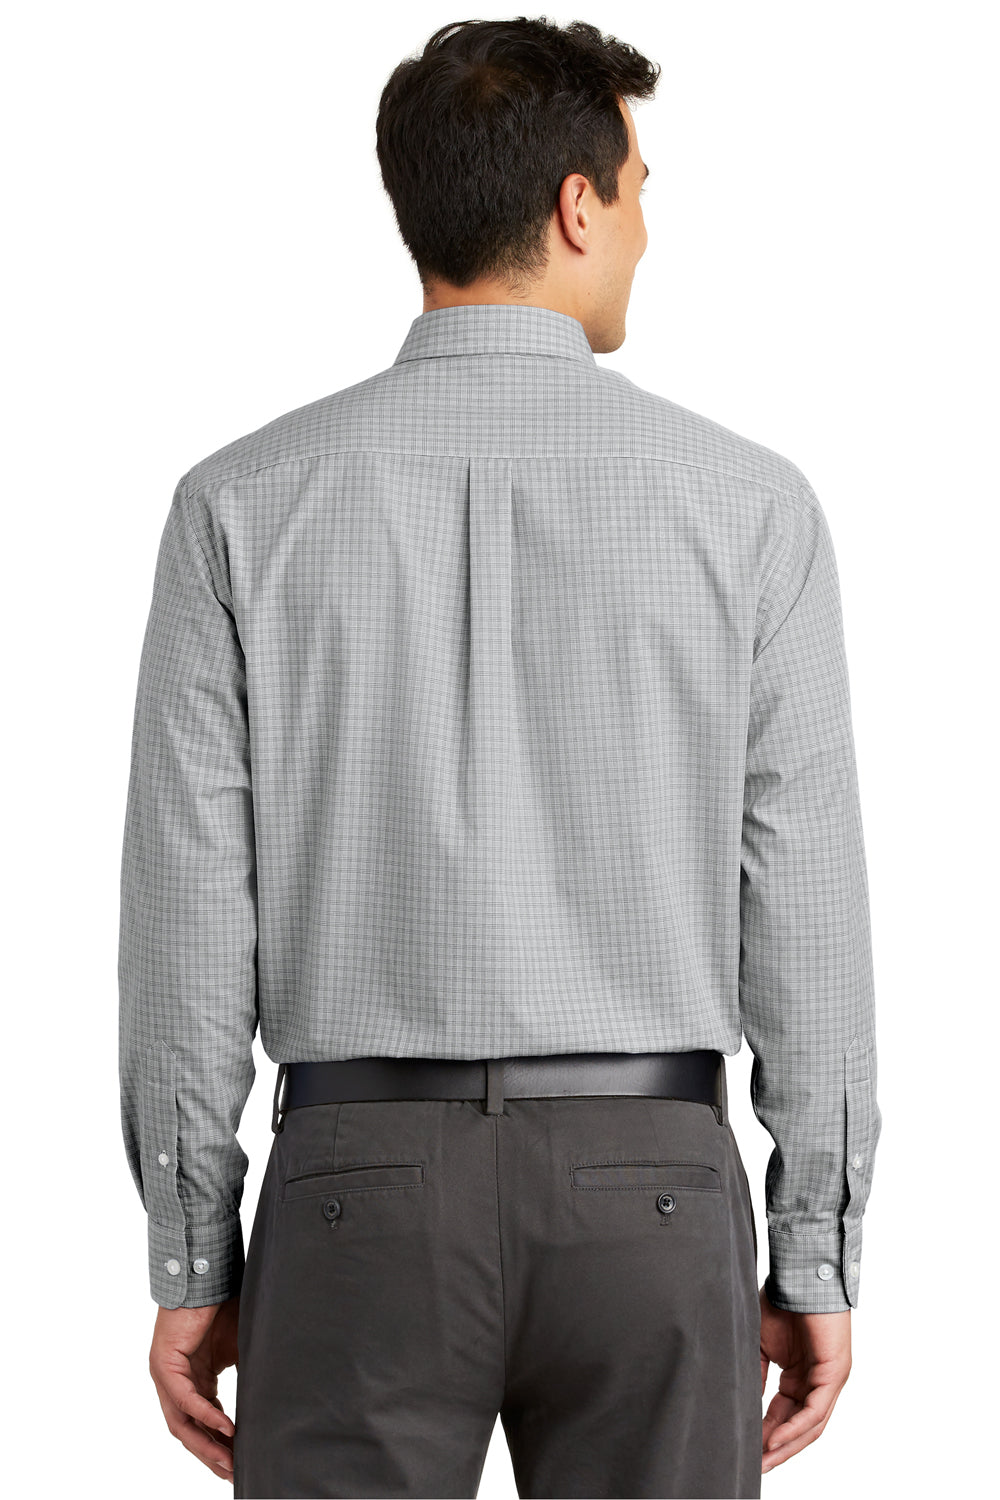 Port Authority S639 Mens Easy Care Wrinkle Resistant Long Sleeve Button Down Shirt w/ Pocket Charcoal Grey Back